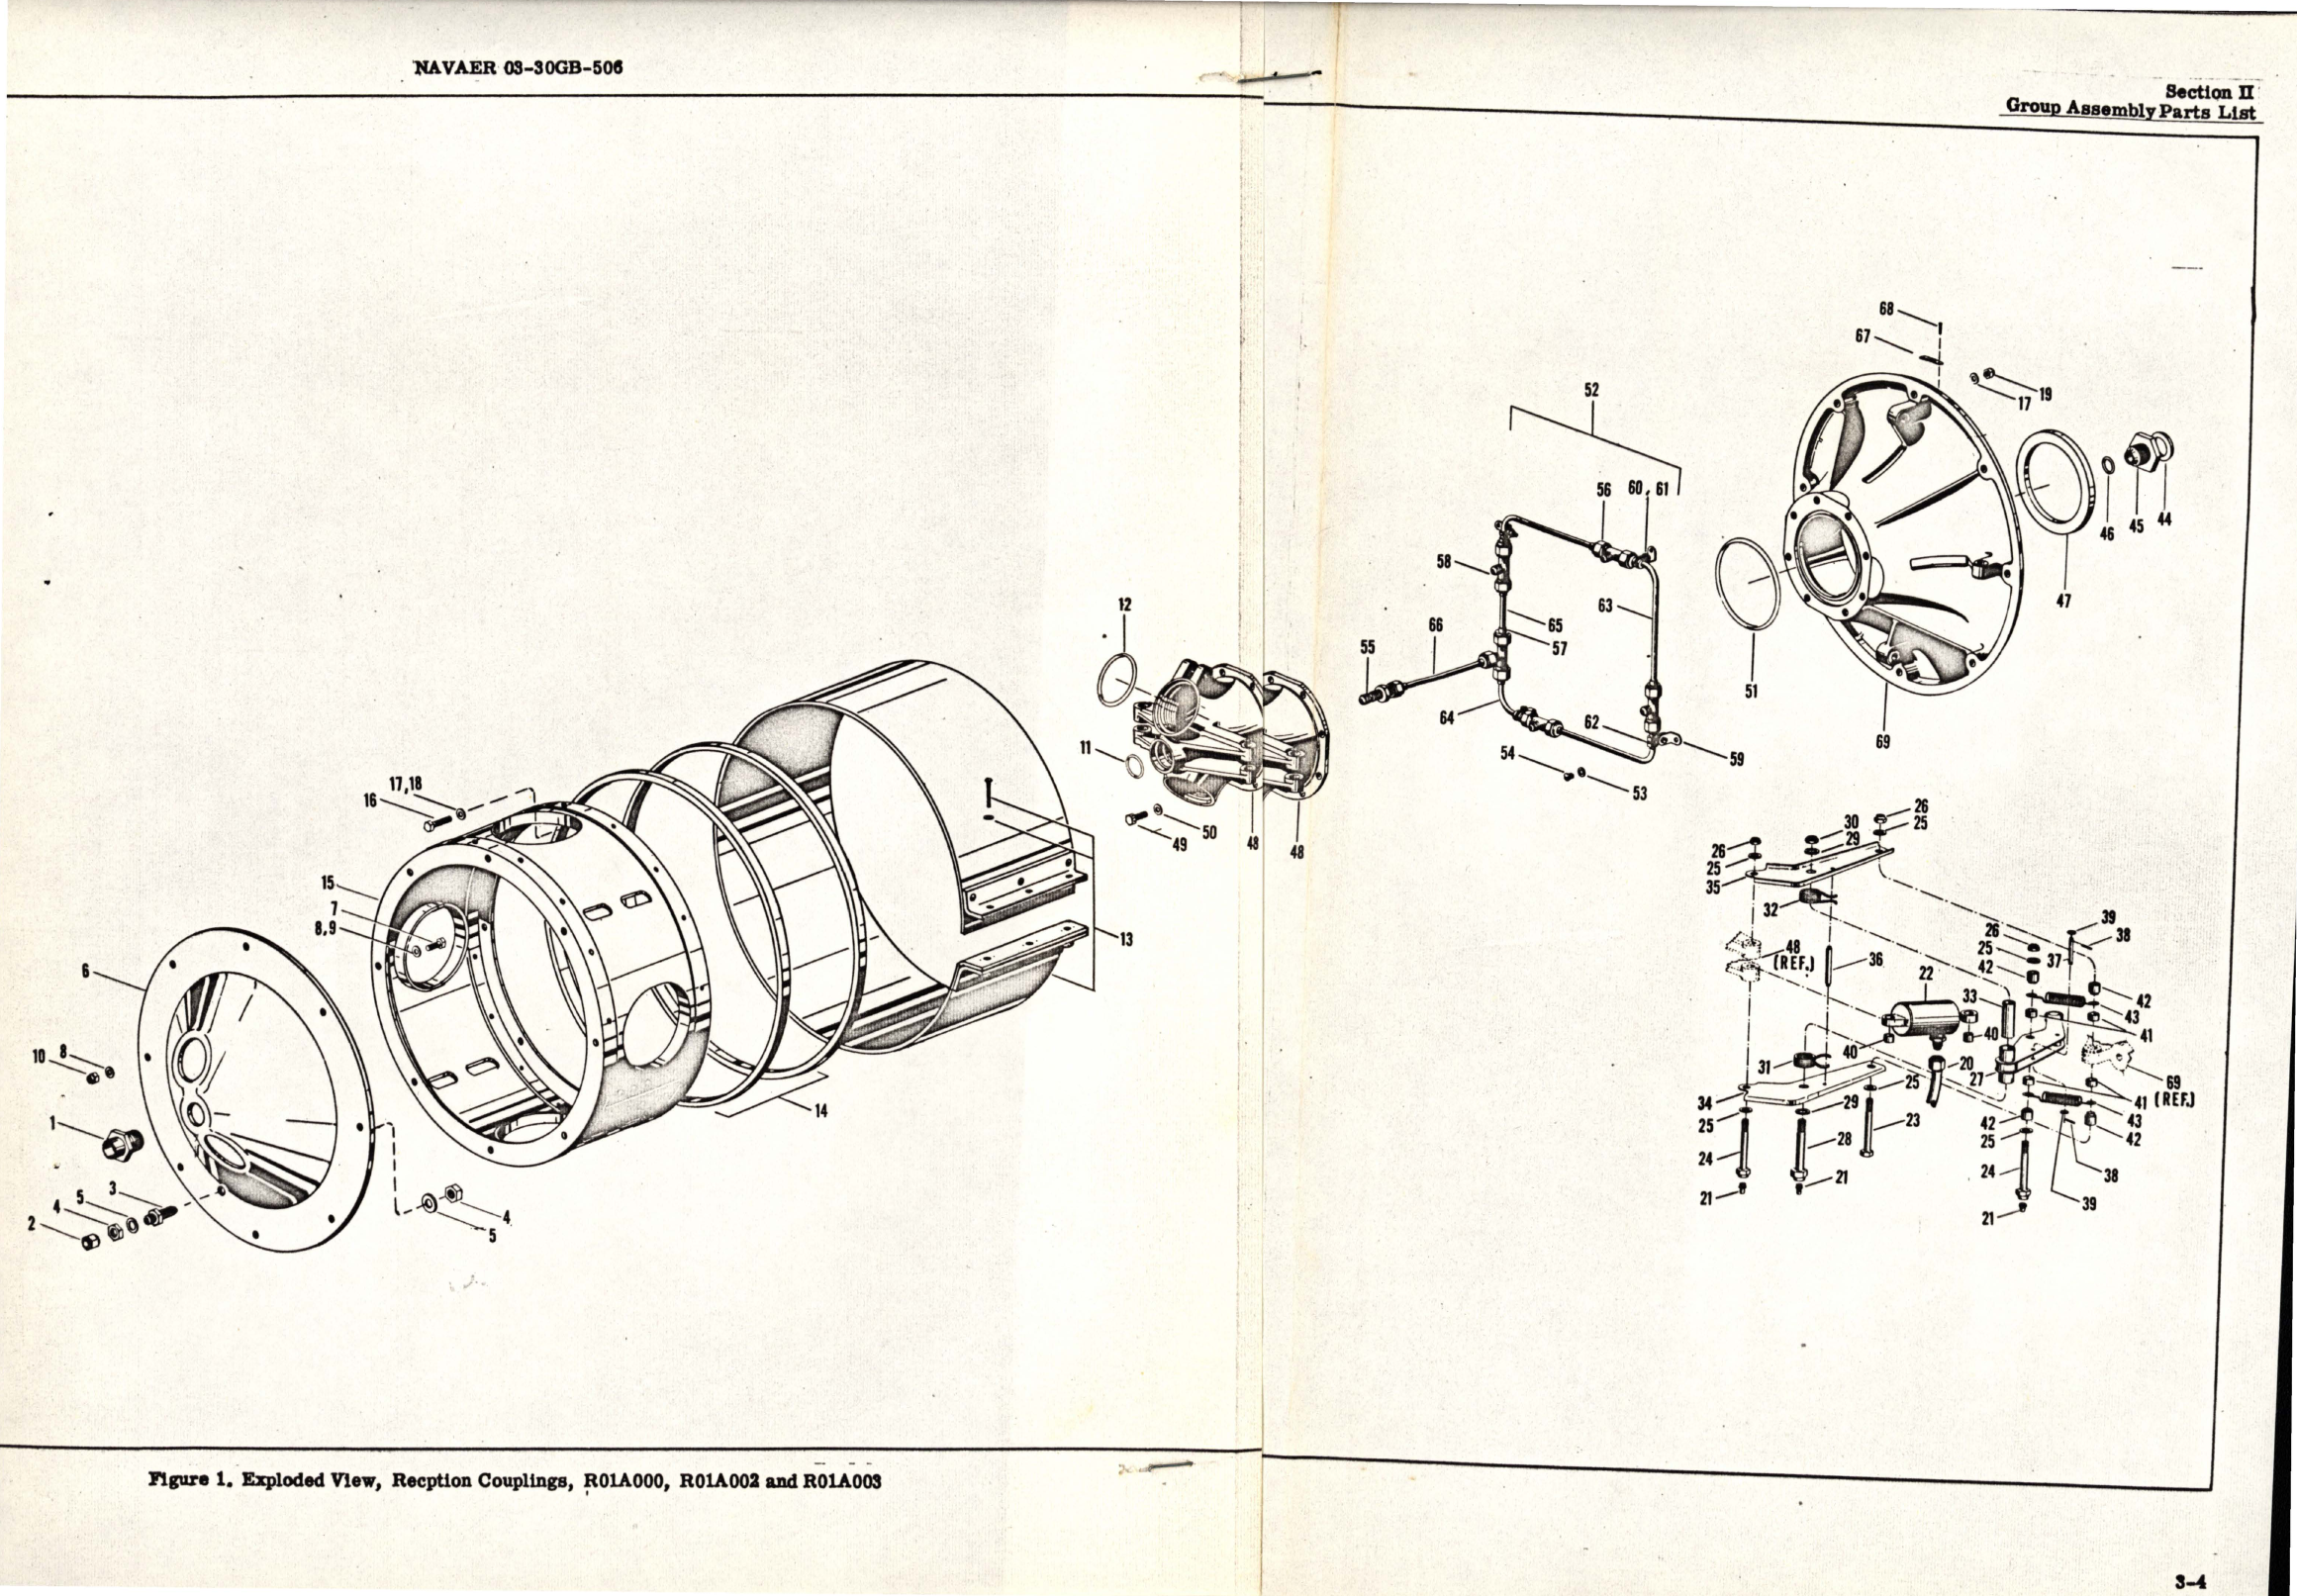 Sample page 5 from AirCorps Library document: Illustrated Parts Breakdown for Reception Couplings - Parts R01A000, R01A002, R01A003 